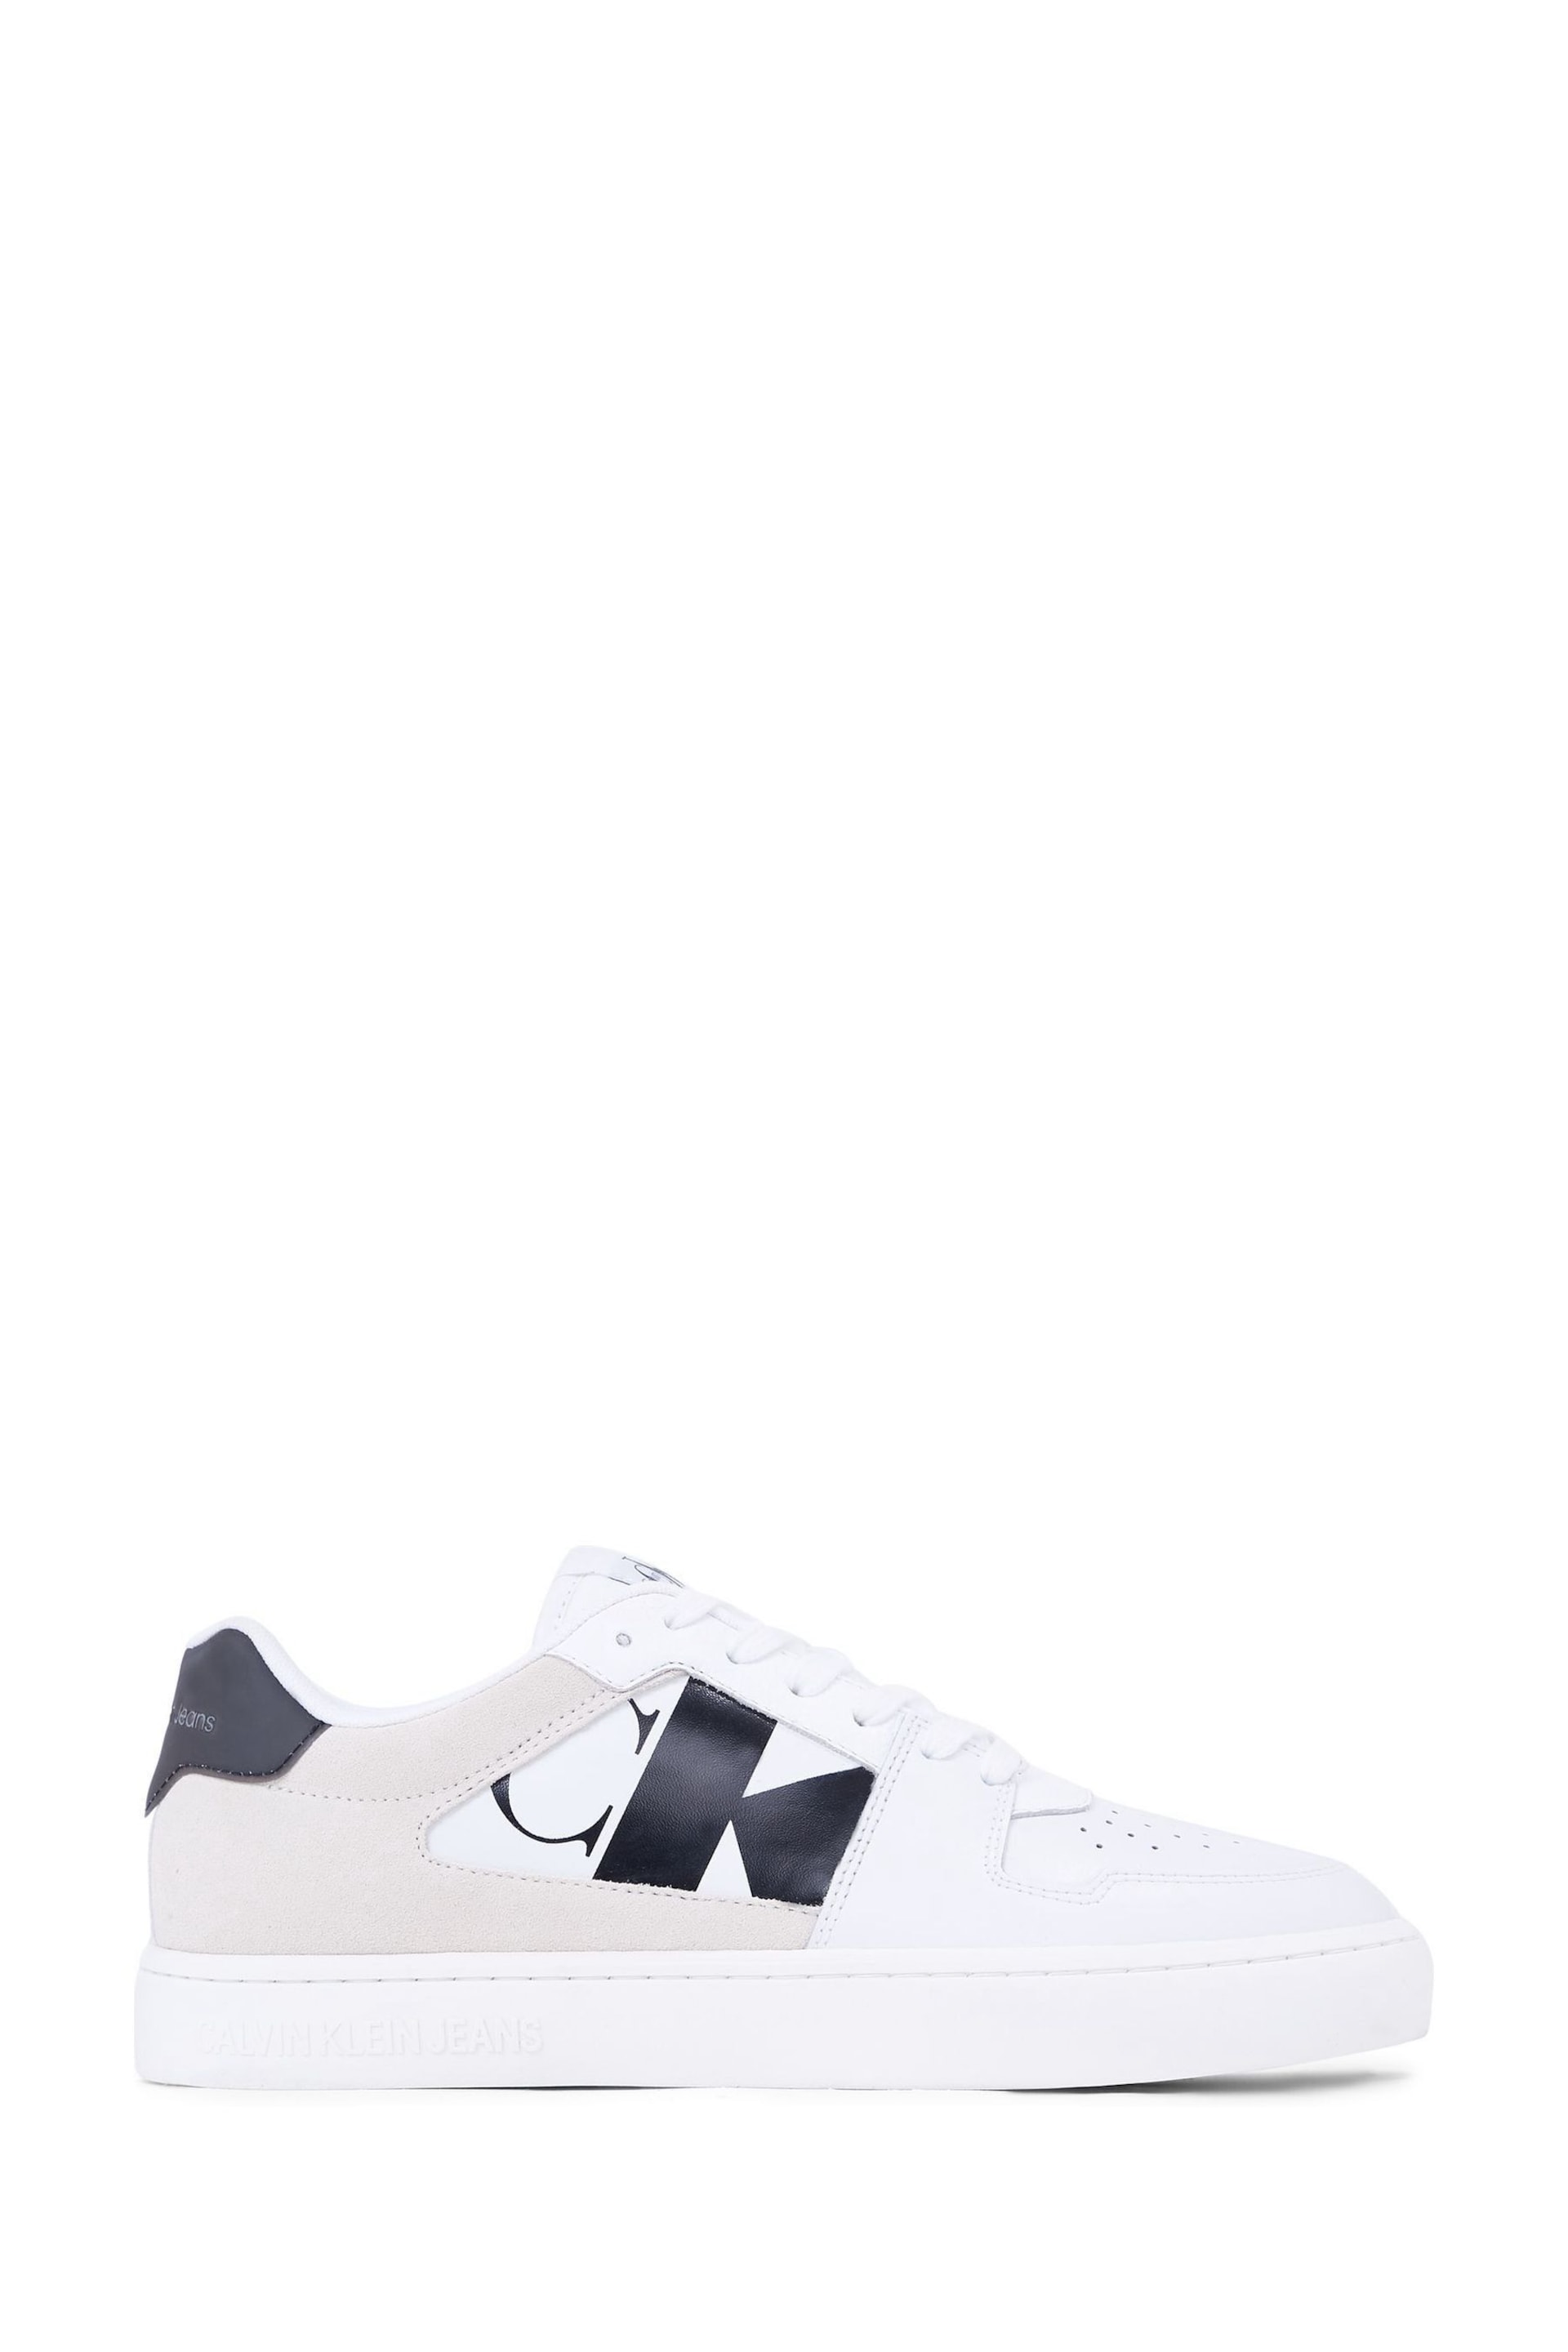 Calvin Klein White Classic Cupsole Low Lace-Up Trainers - Image 3 of 4